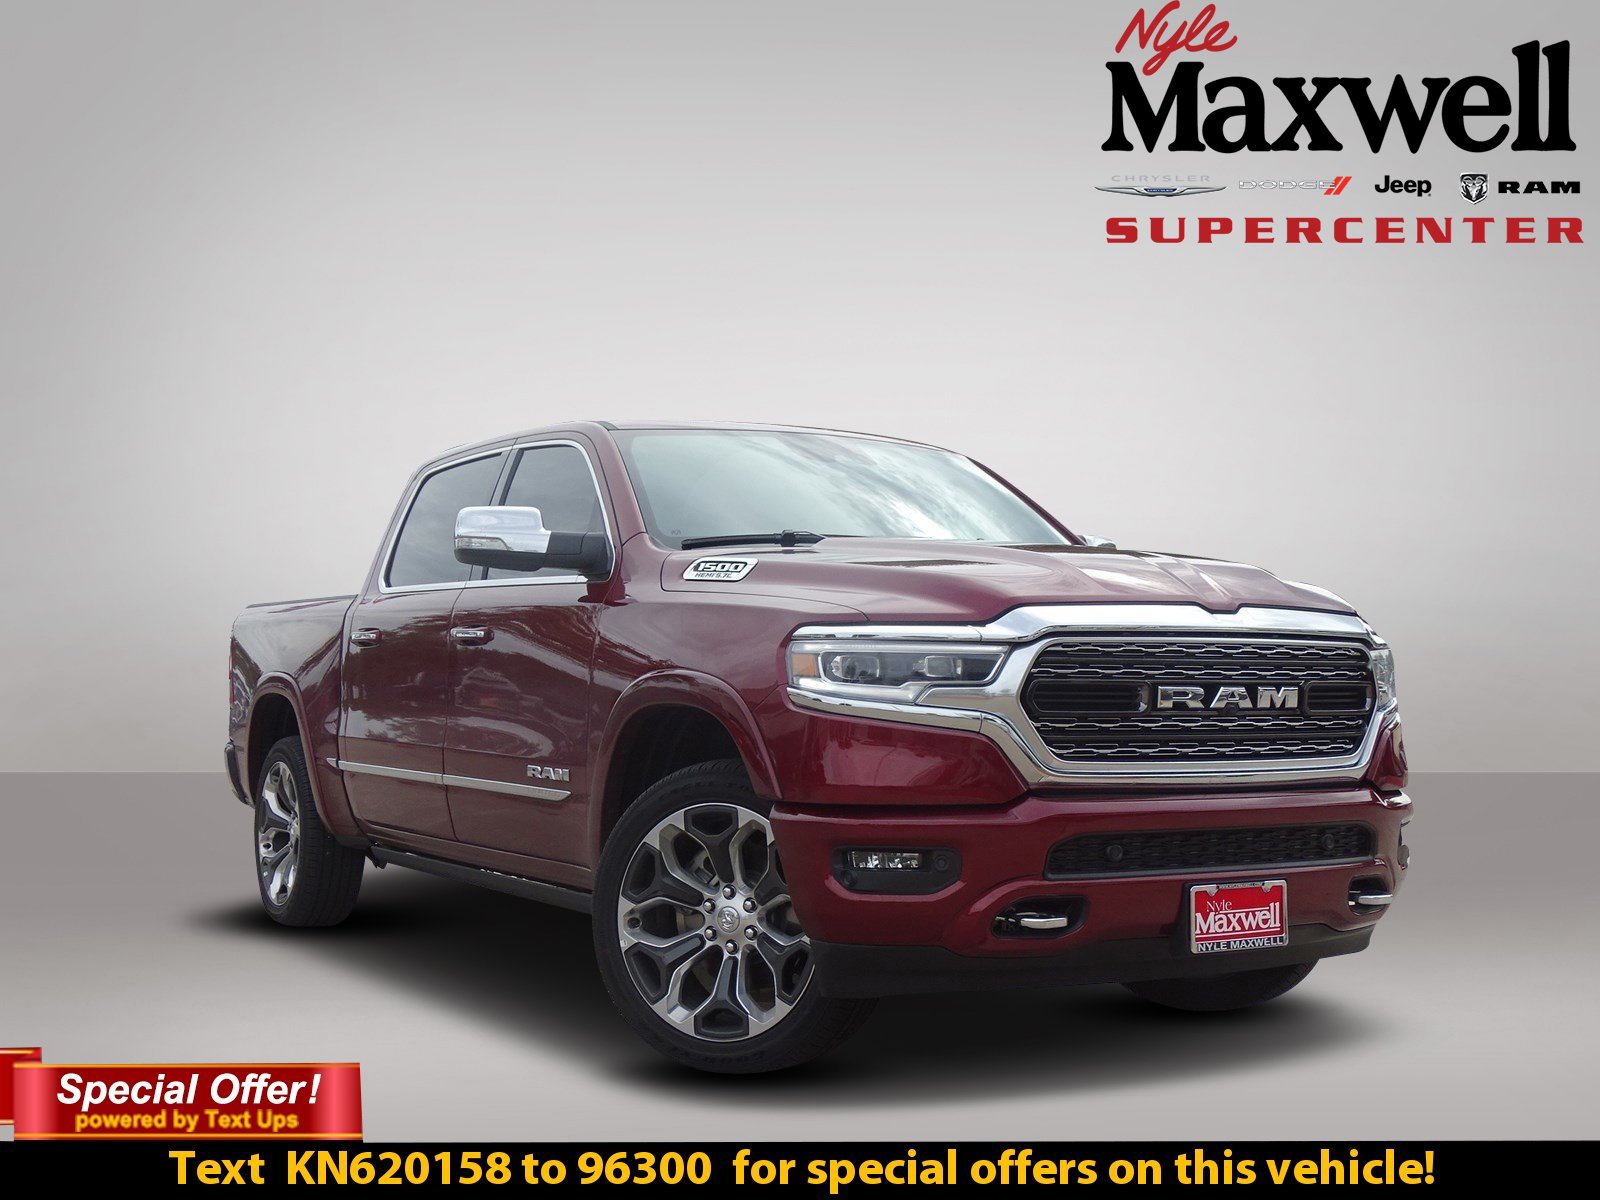 New 2019 Ram All New 1500 Limited Crew Cab In Austin Kn620158 Nyle